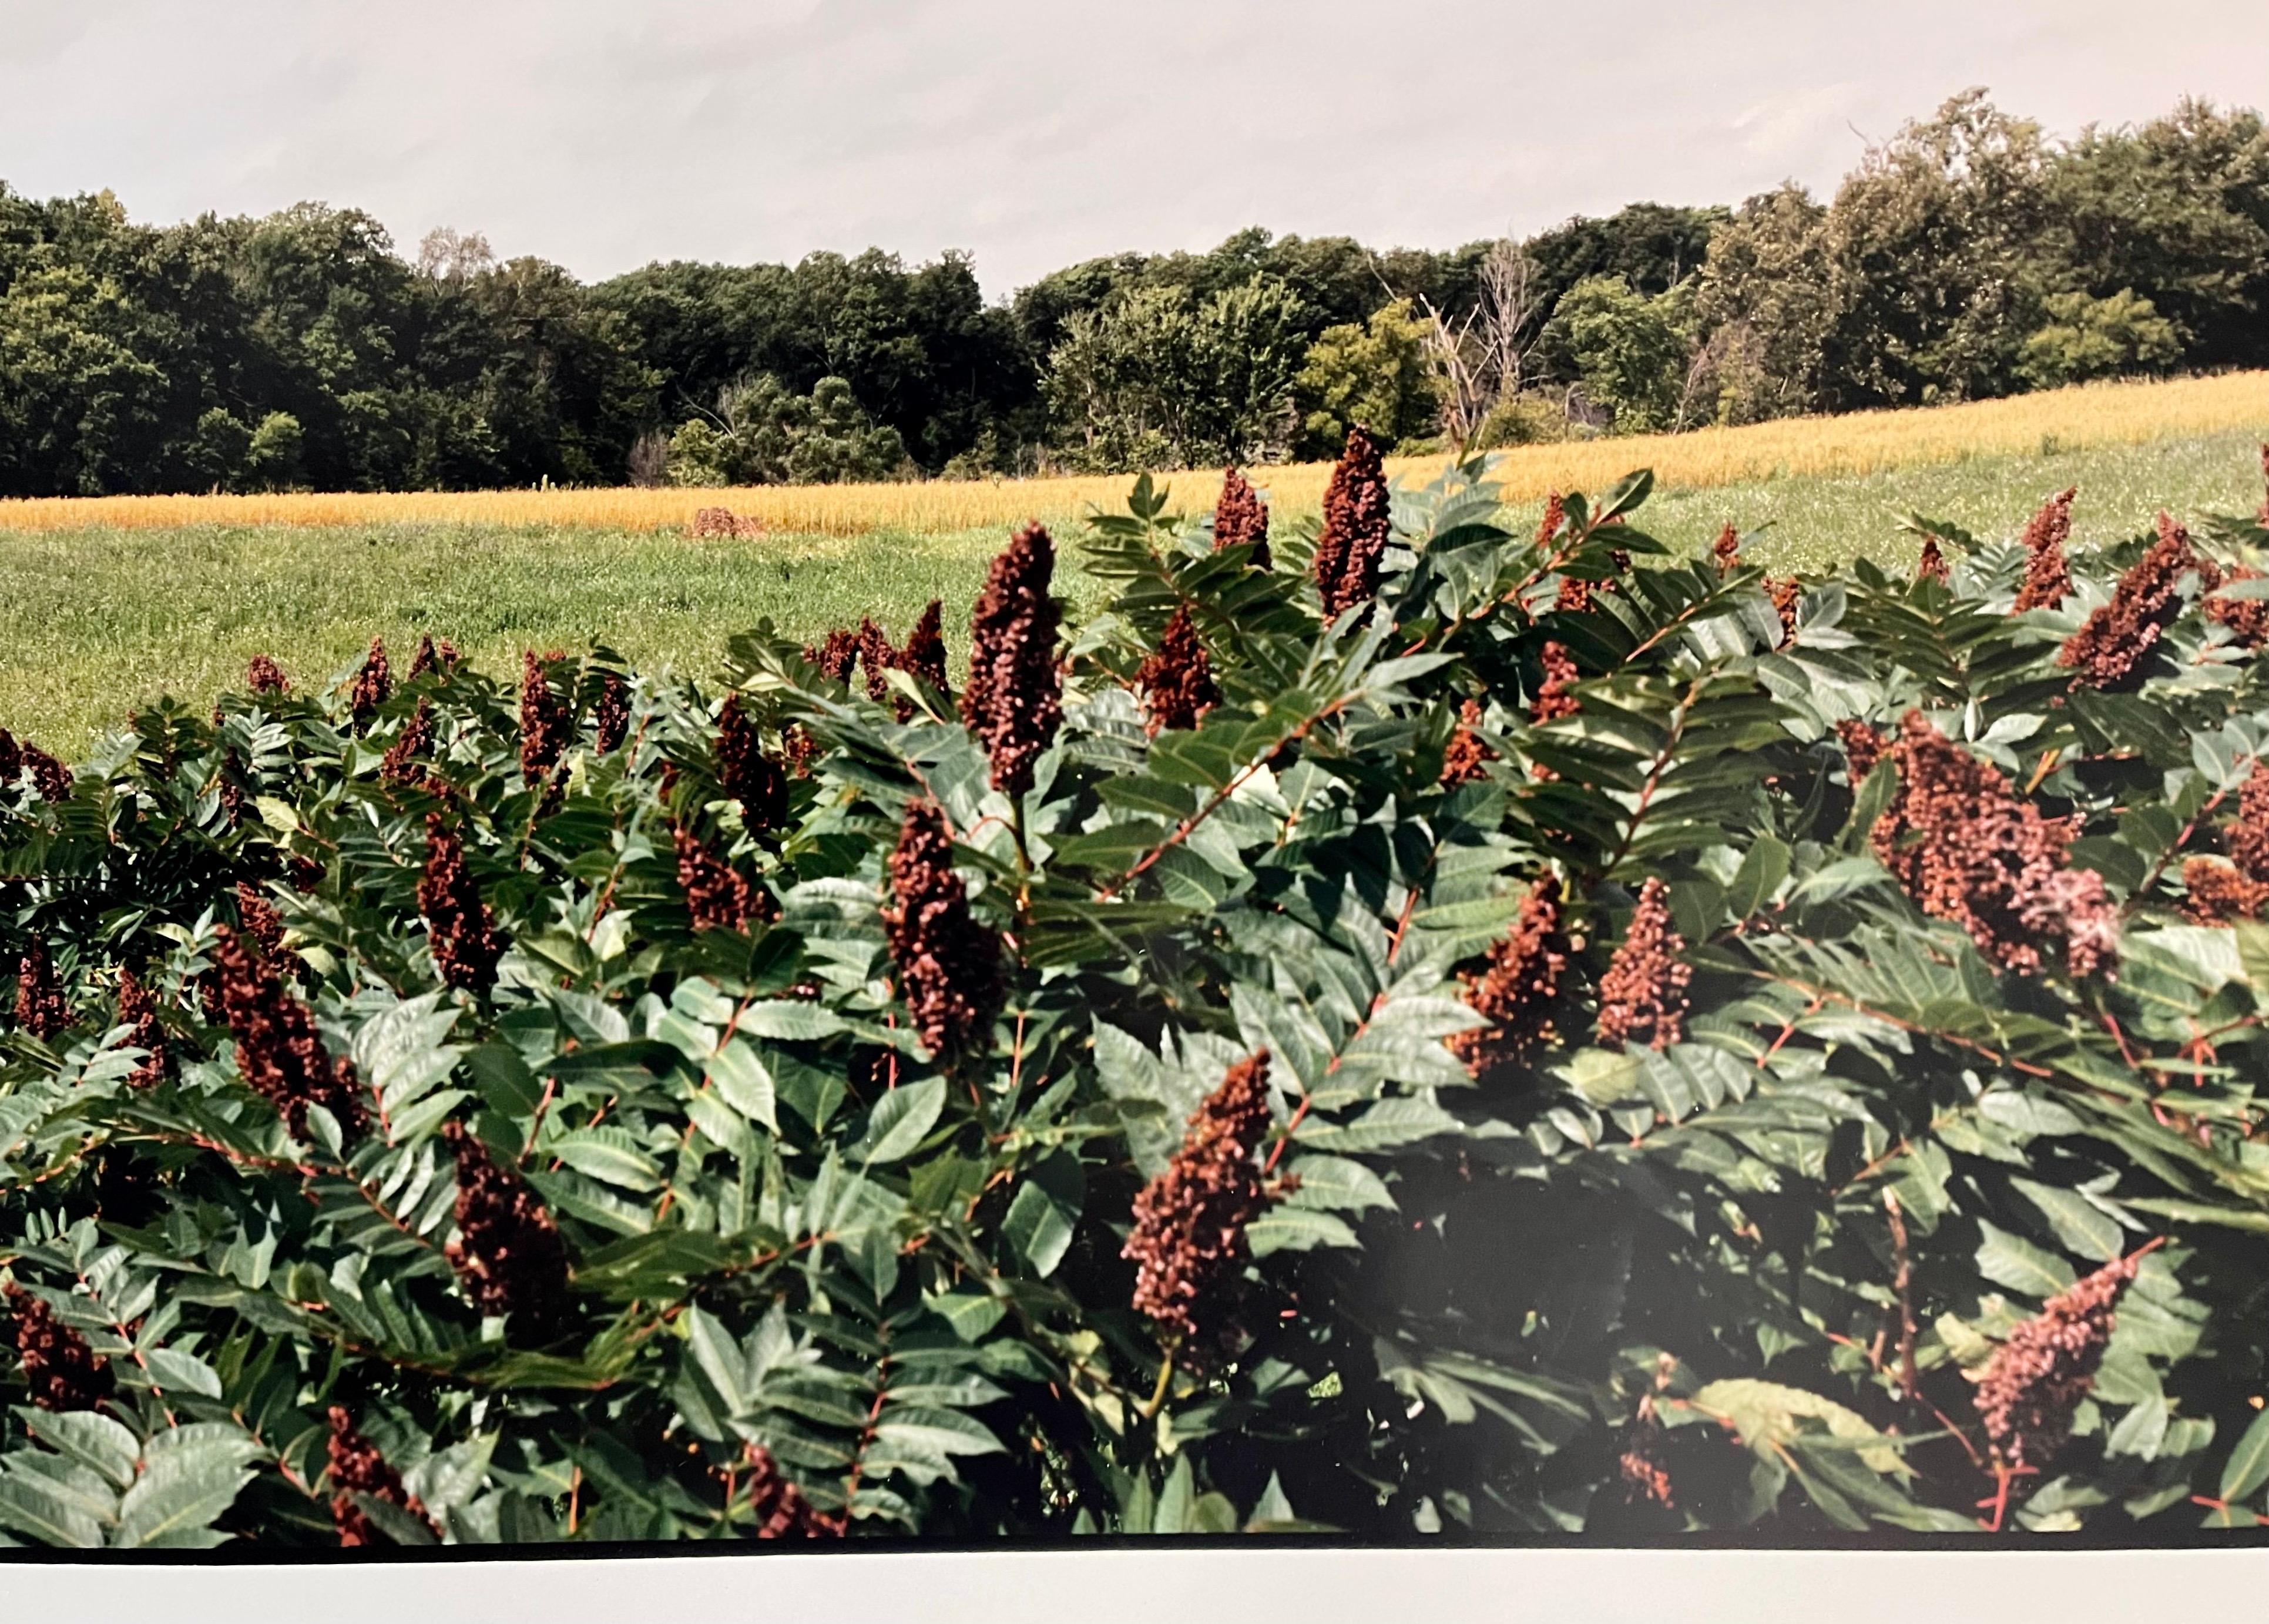 Everts Township Homestead, Summer, 1993
Fabulous American landscape photography of a rural landscape scene. 
from small hand signed edition of 20
Large Format Chromogenic print on Kodak Professional Paper
The sheets are approximately 30 X 56